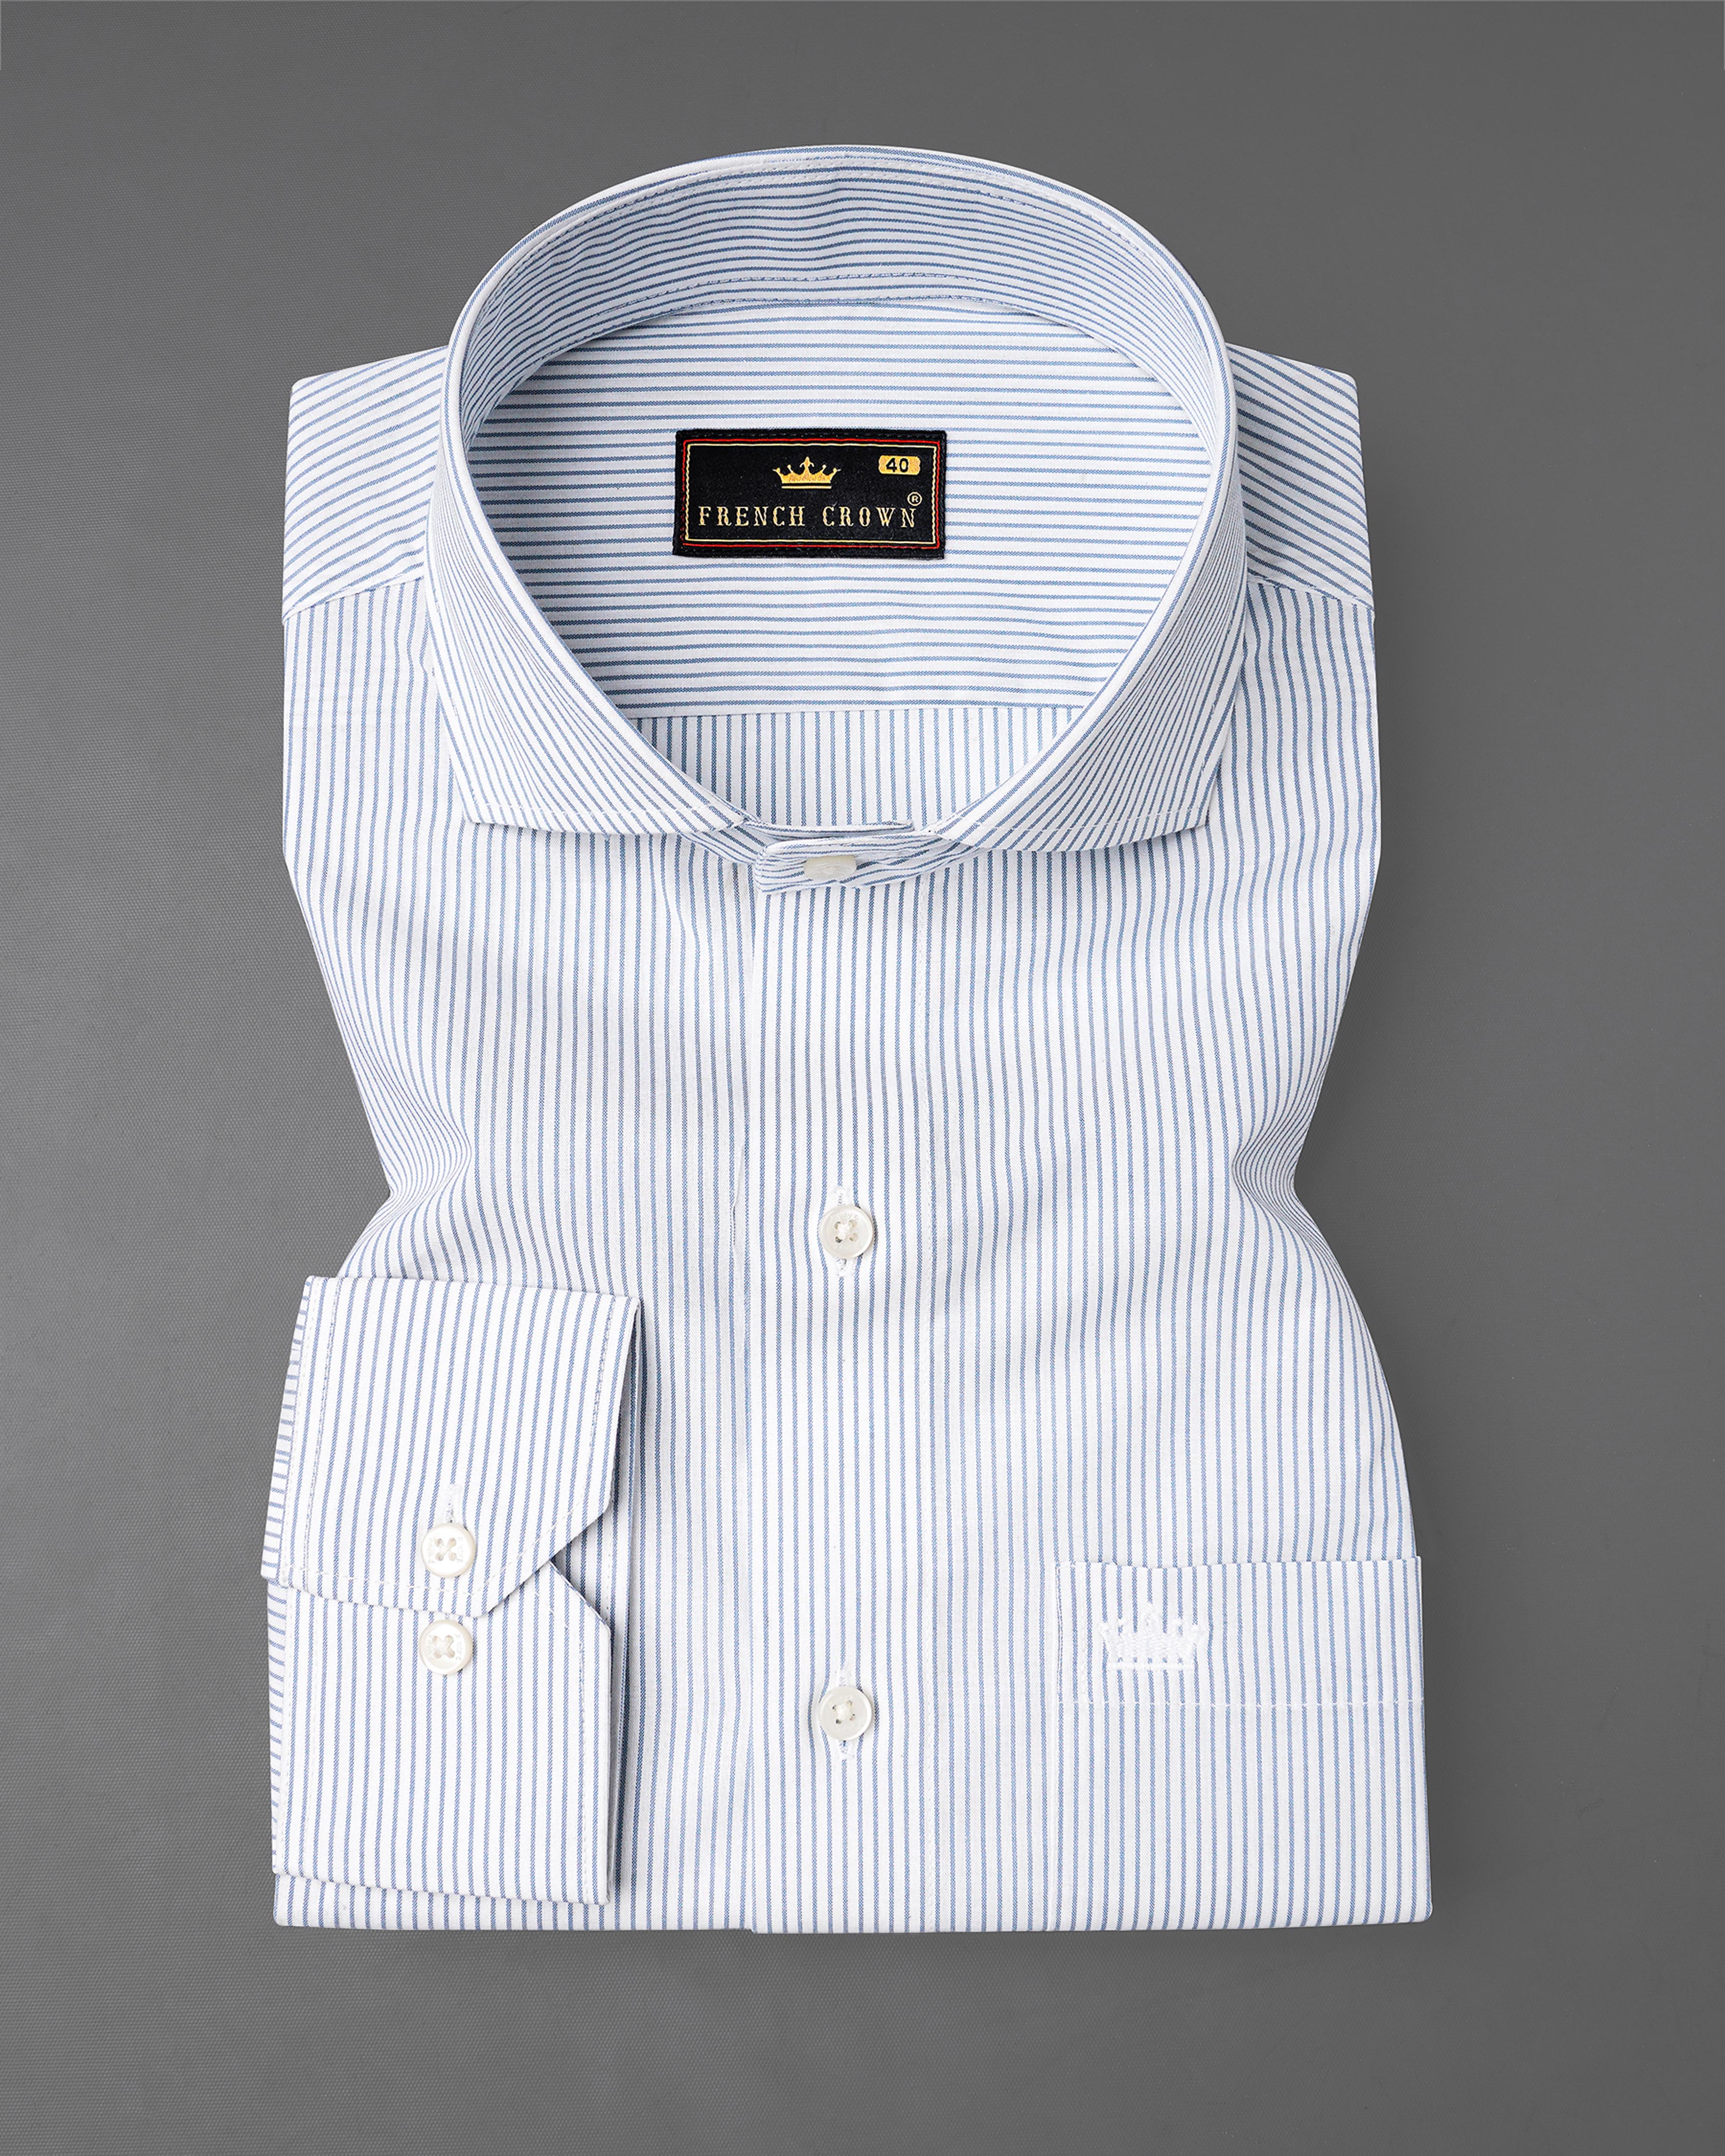 Bright White with Chateau Blue Pin Striped Premium Cotton Shirt 8120-CA-38, 8120-CA-H-38, 8120-CA-39, 8120-CA-H-39, 8120-CA-40, 8120-CA-H-40, 8120-CA-42, 8120-CA-H-42, 8120-CA-44, 8120-CA-H-44, 8120-CA-46, 8120-CA-H-46, 8120-CA-48, 8120-CA-H-48, 8120-CA-50, 8120-CA-H-50, 8120-CA-52, 8120-CA-H-52